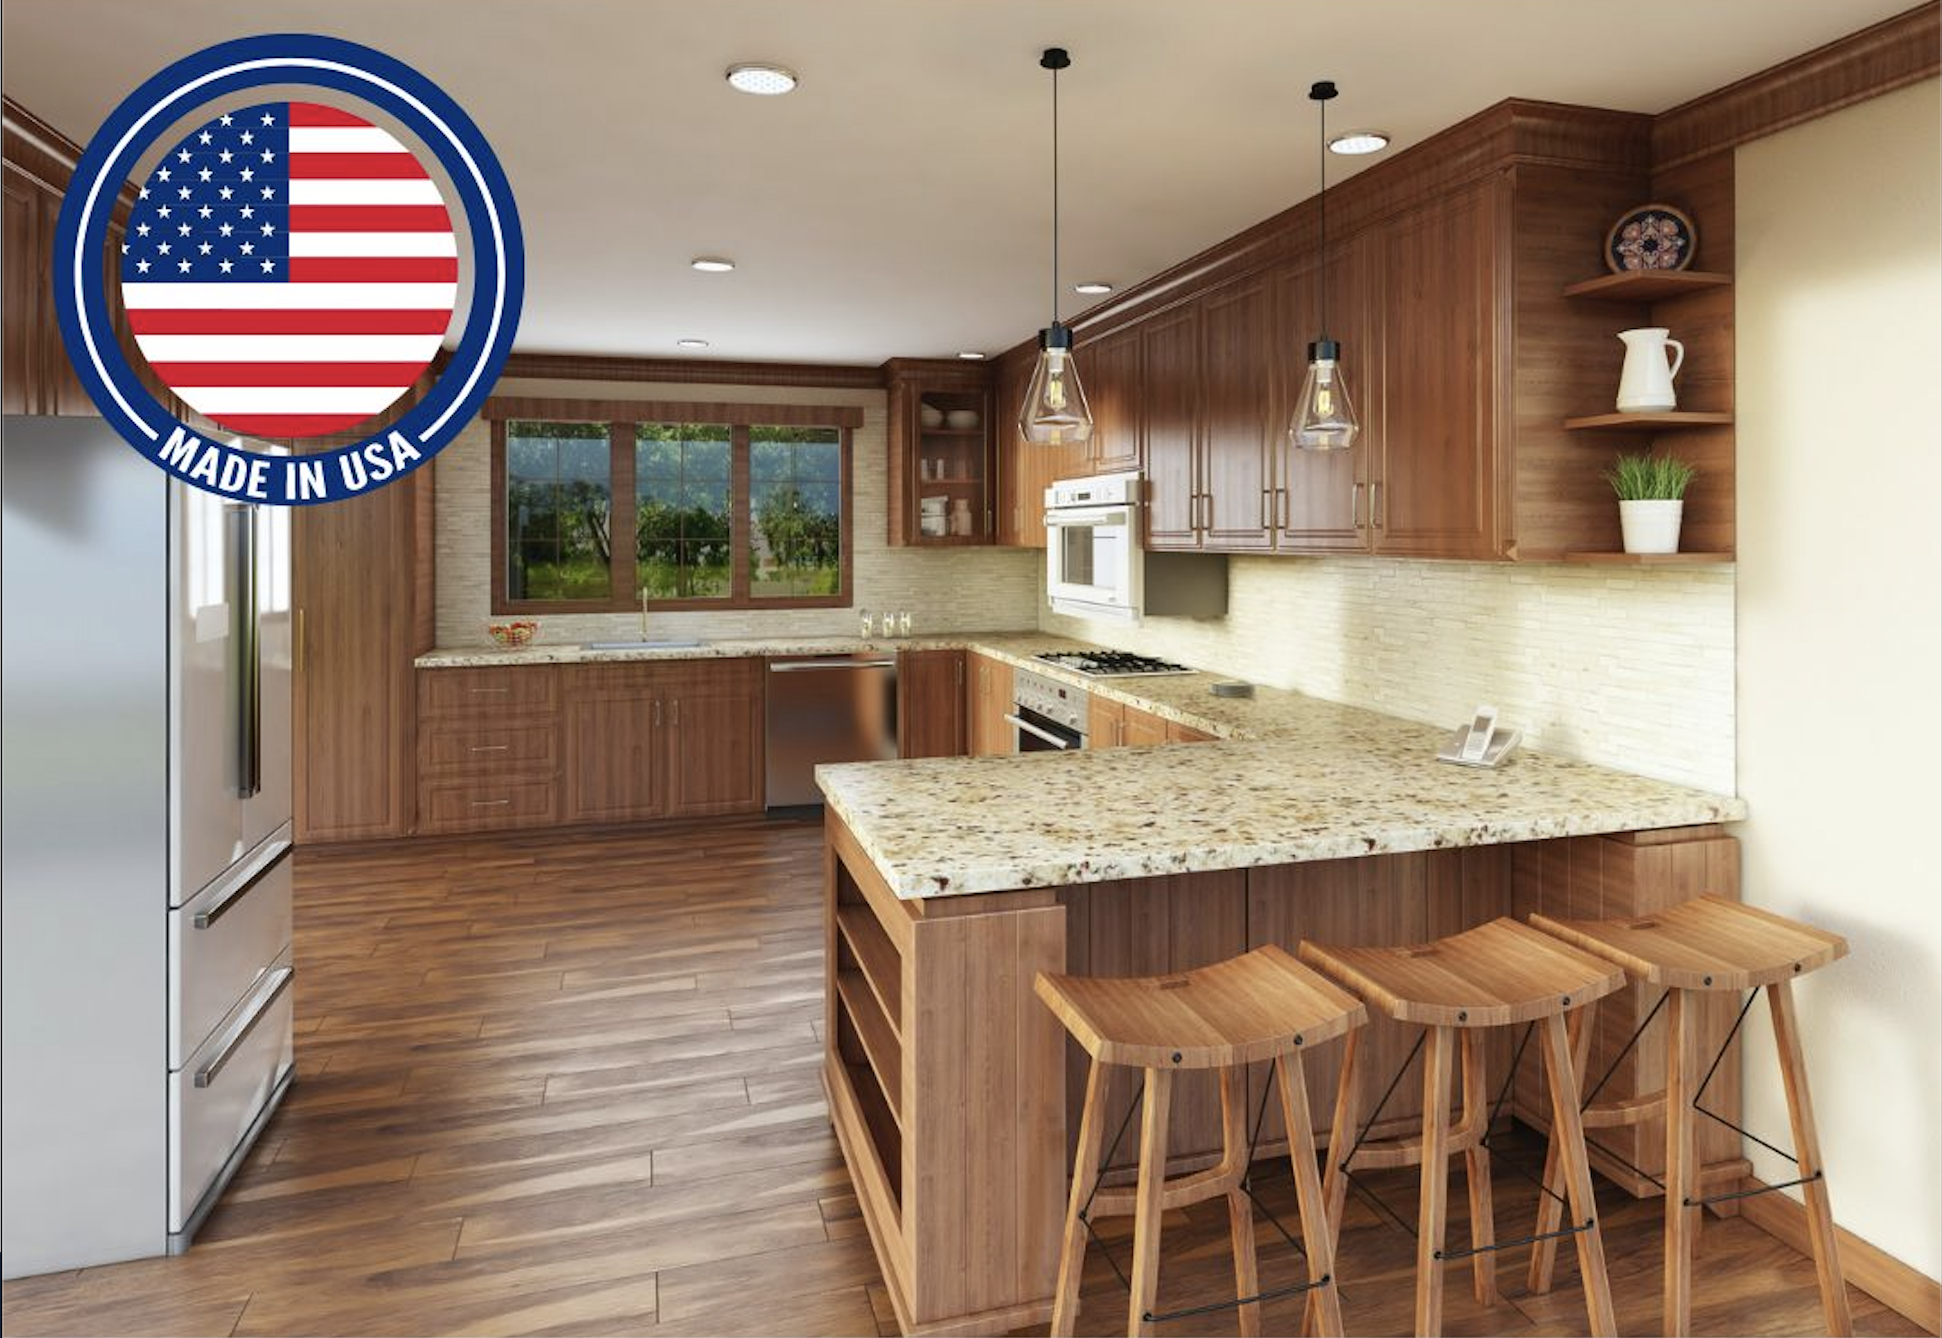 American made cabinets